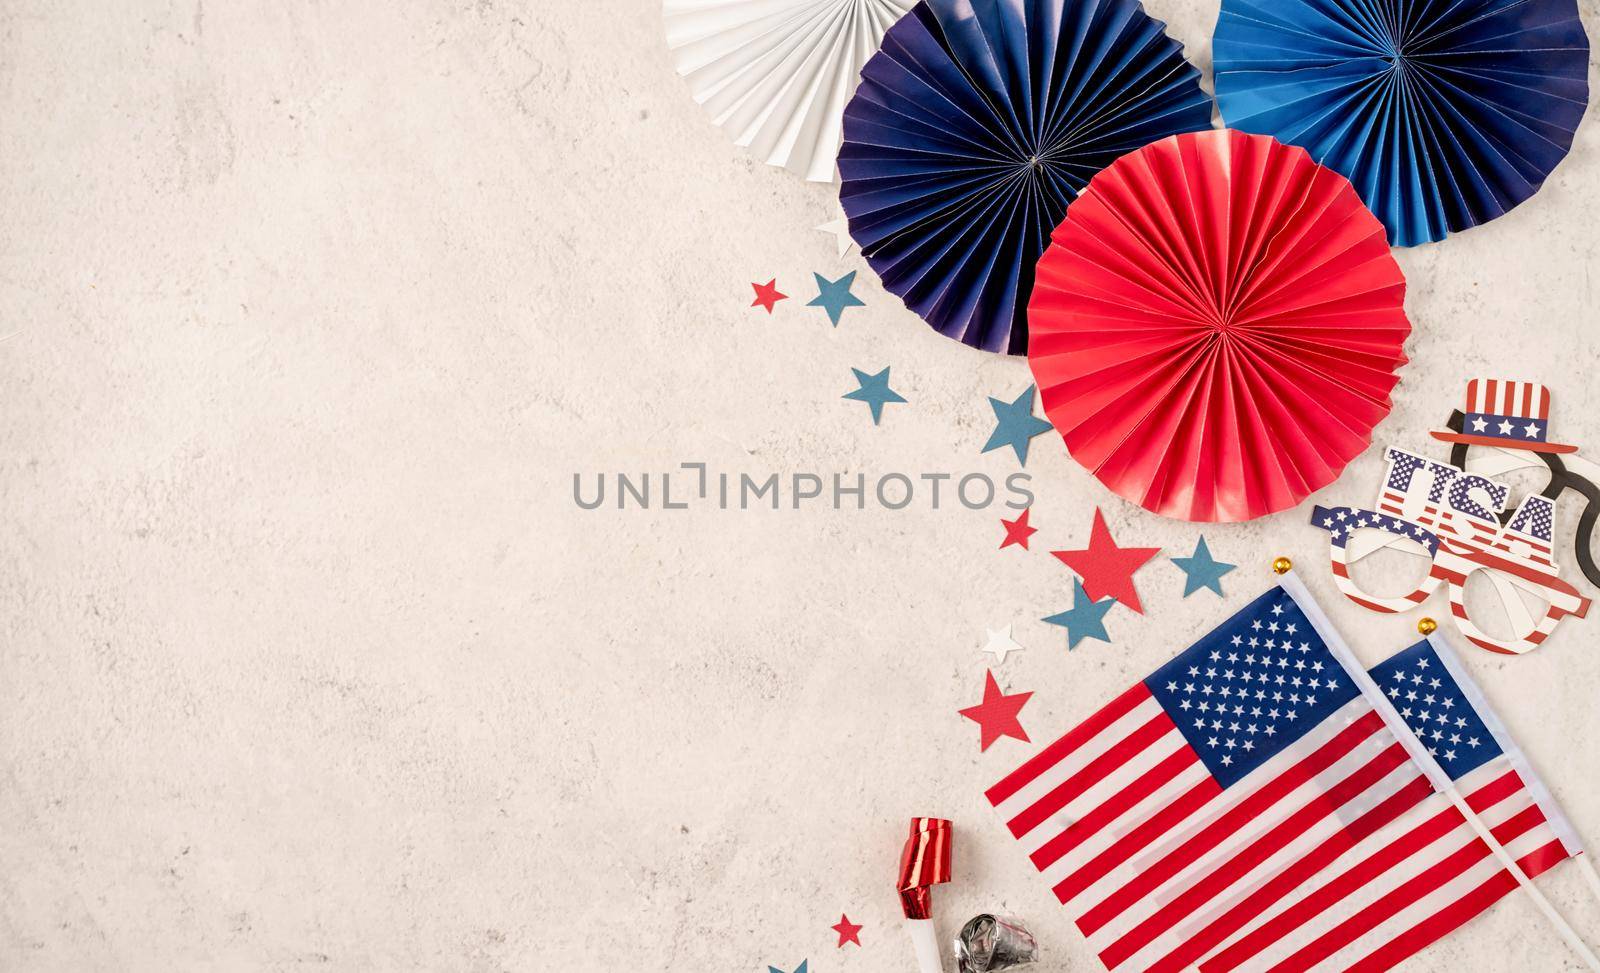 USA Memorial day, Presidents day, Veterans day, Labor day, or 4th of July celebration. USA independence day party element top view flat lay on solid marble background